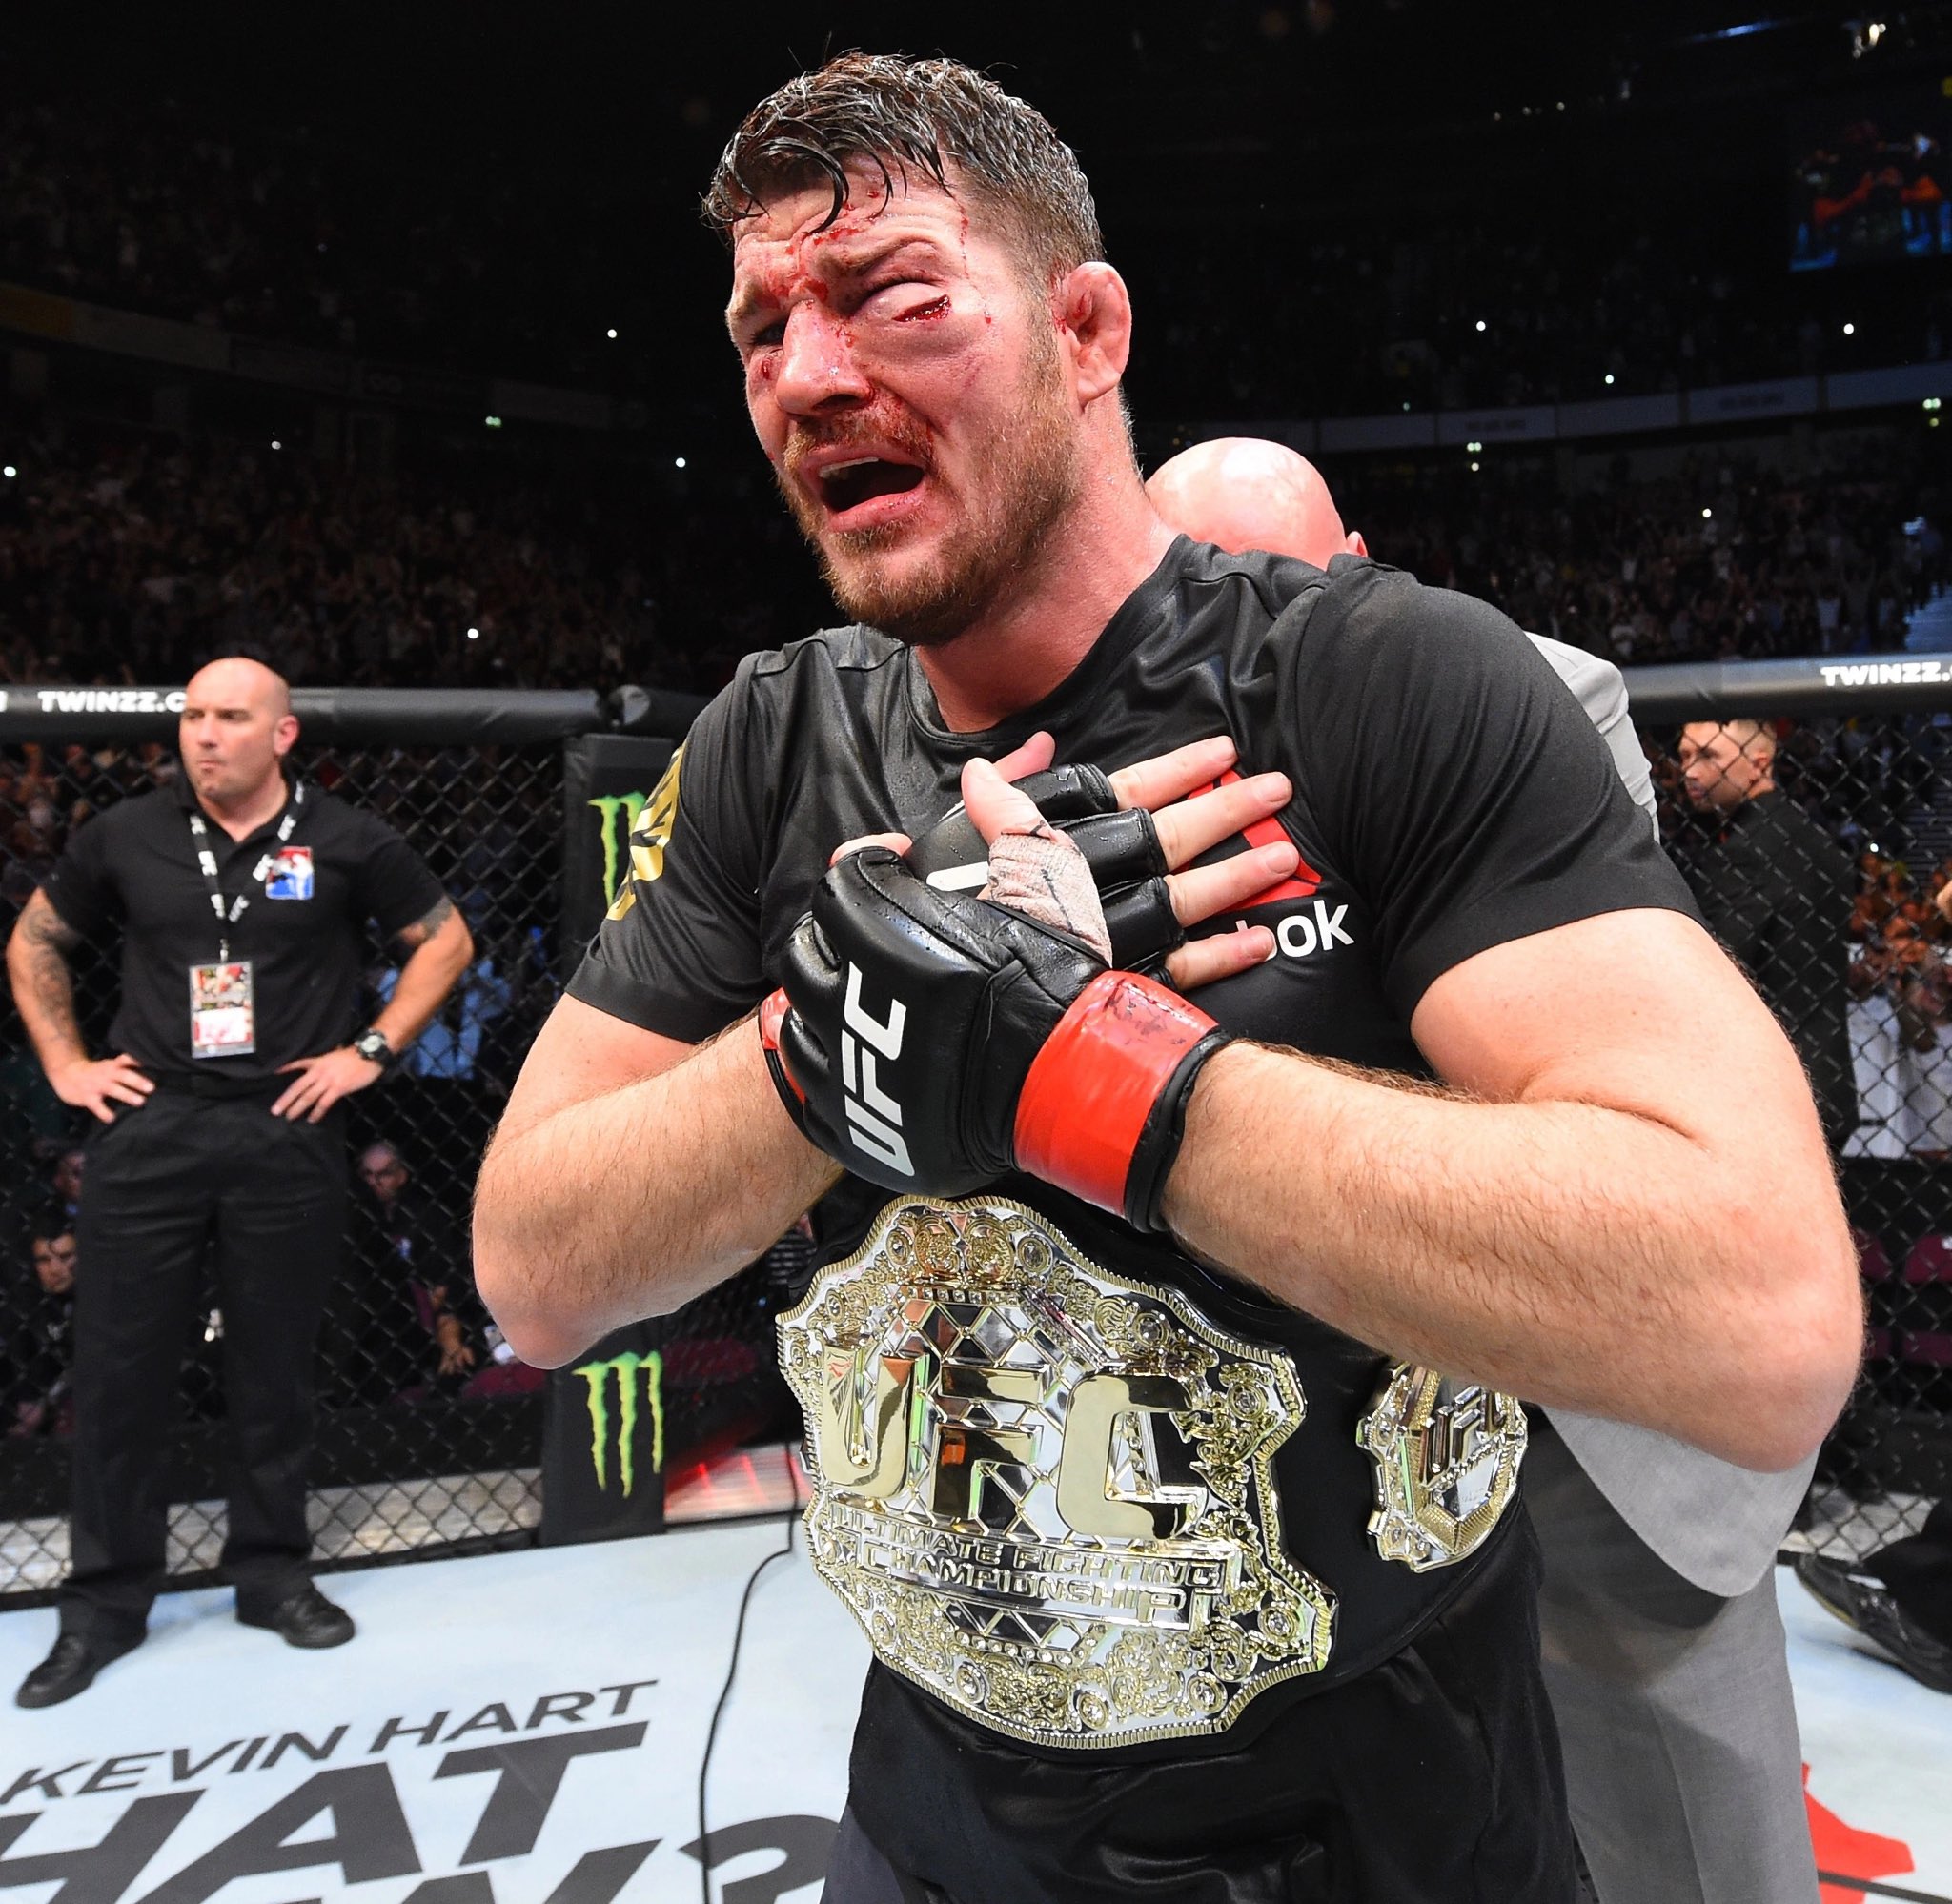  Happy 43rd birthday to the only ever British UFC champion Michael Bisping!         